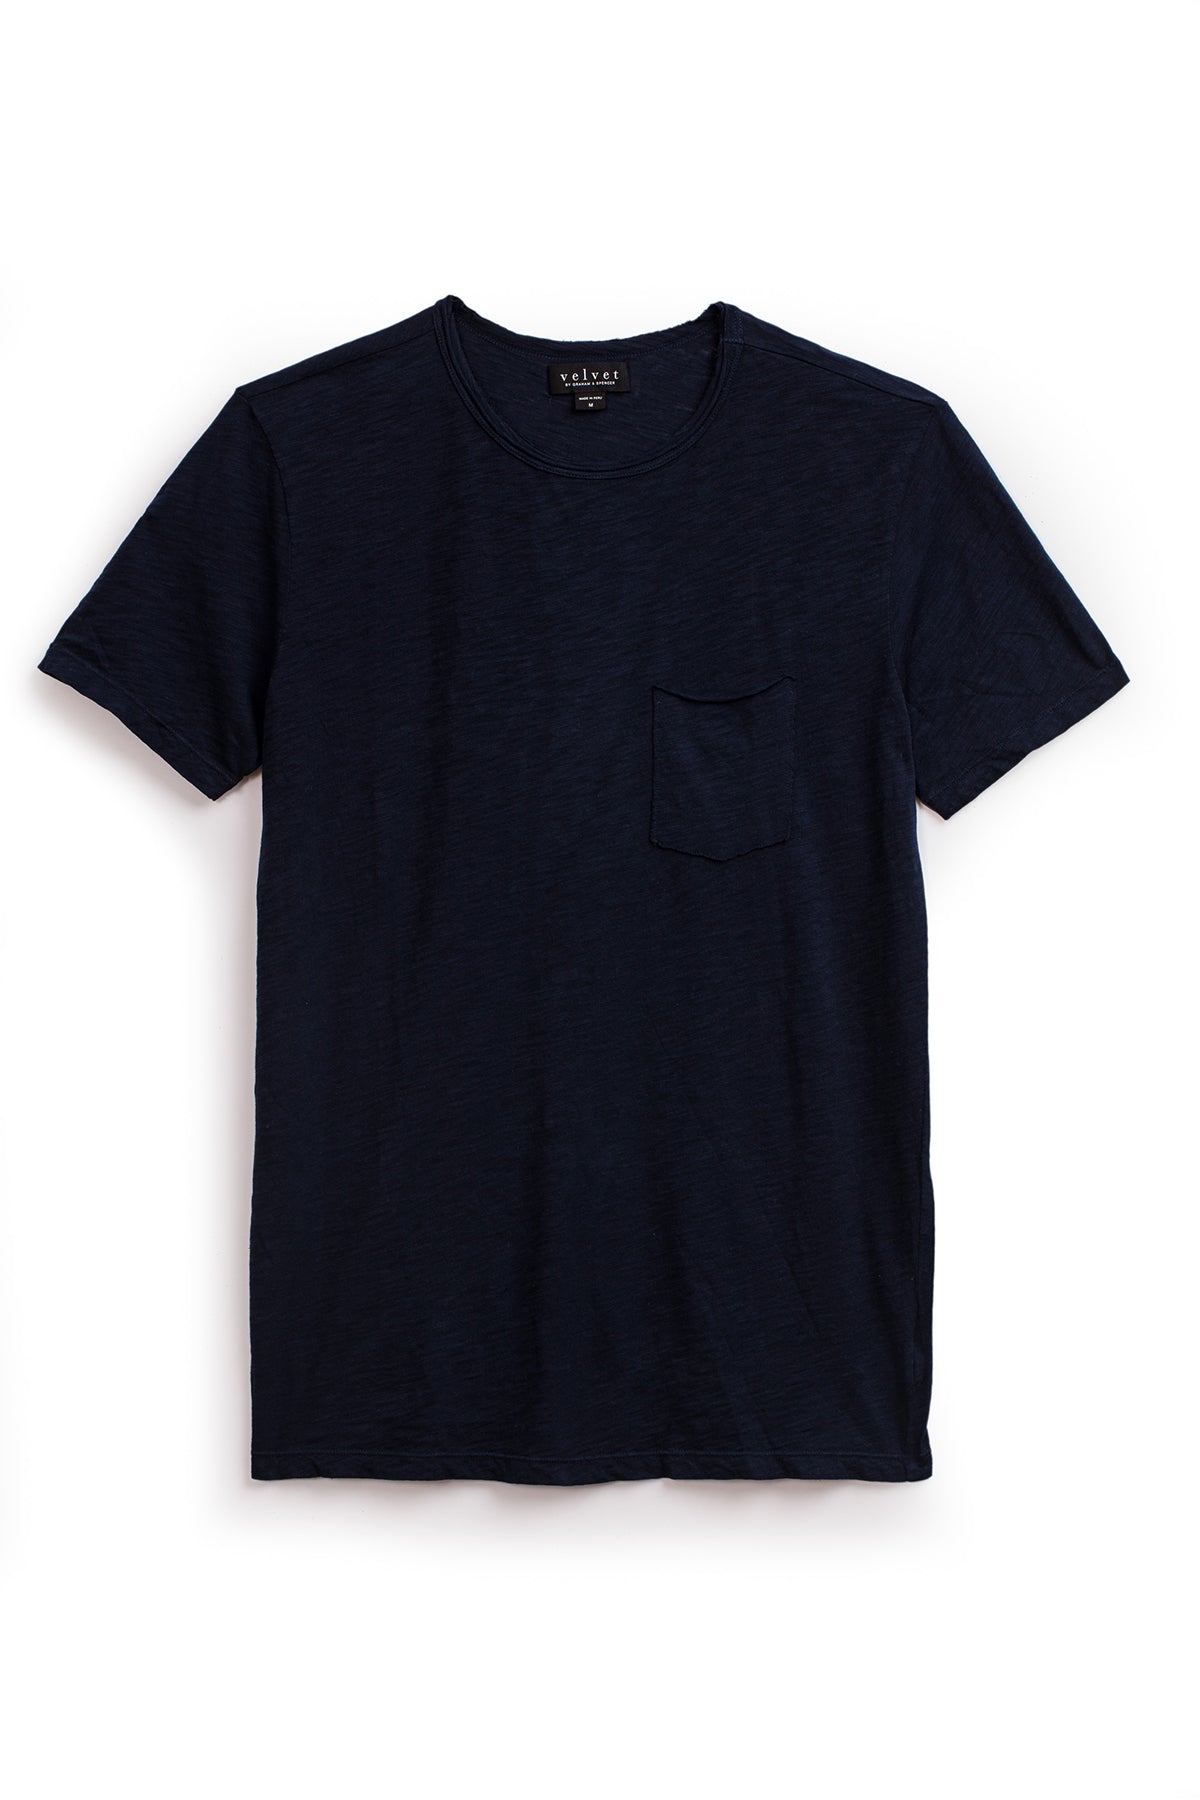 Plain dark blue Chad Tee with a crew neck and a small pocket on the left chest, crafted from textured cotton slub, displayed against a white background by Velvet by Graham & Spencer.-20868653220033